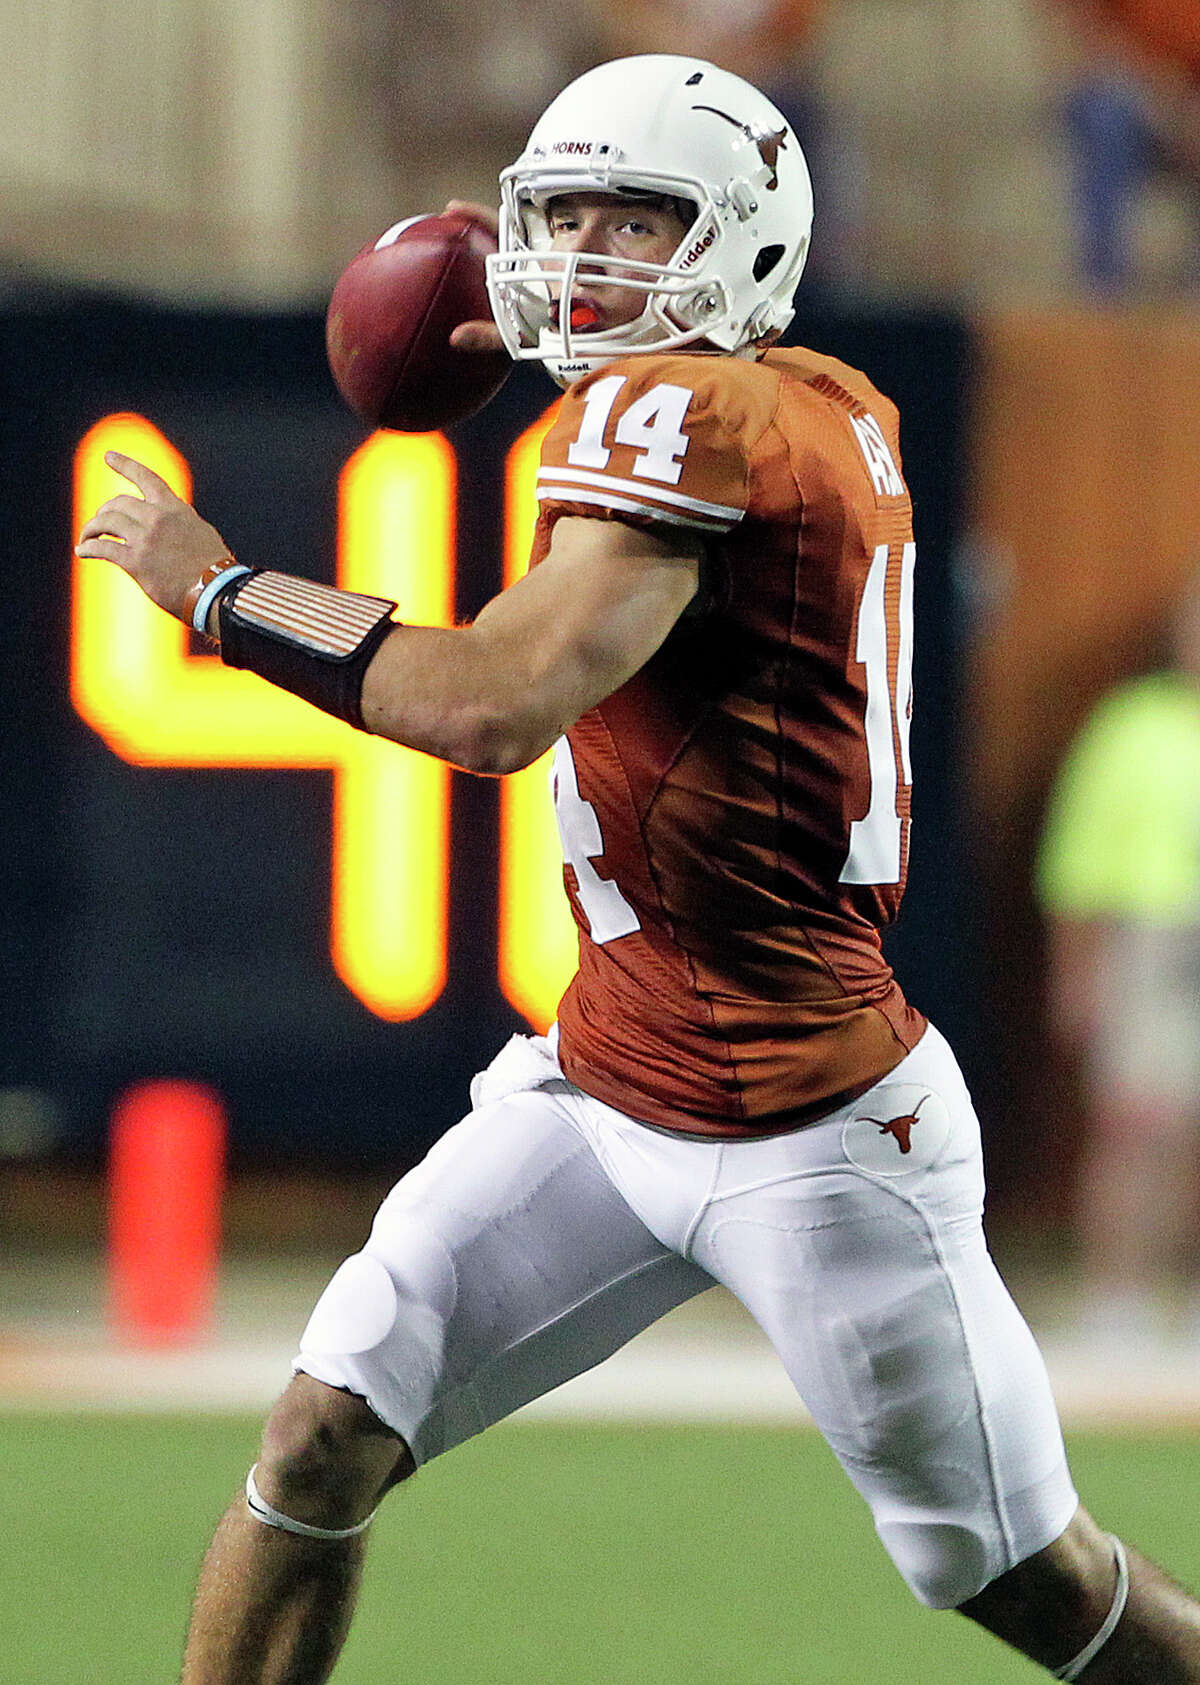 David Ash throws for the Longhorns as Texas hosts Wyoming at D.K.Royal Stadium in Austin on September 1, 2012.